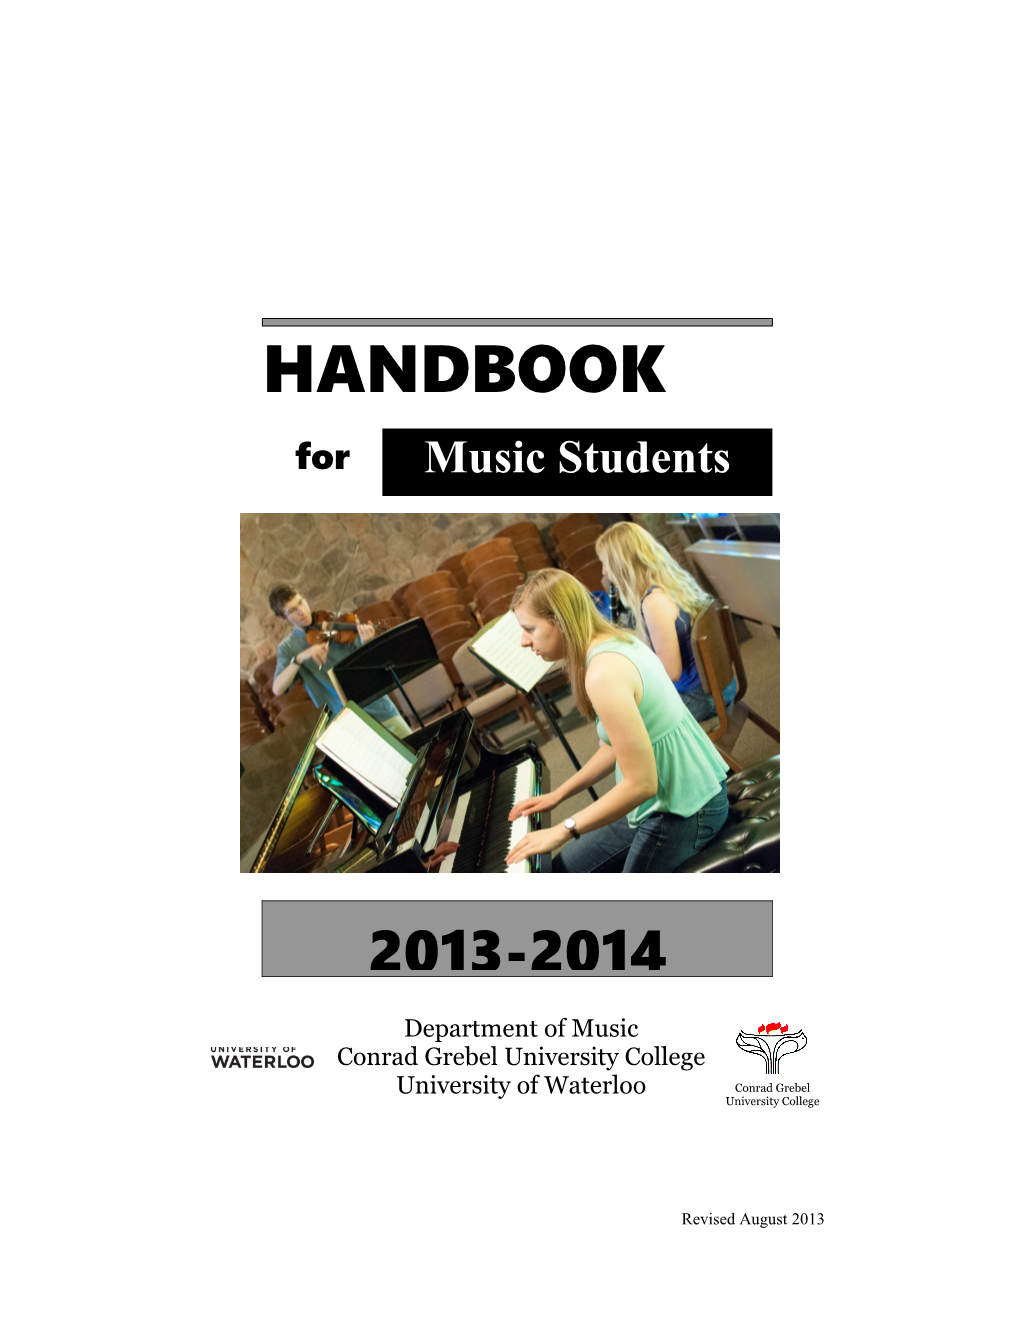 Welcome to the University of Waterloo Department of Music at Conrad Grebel University College